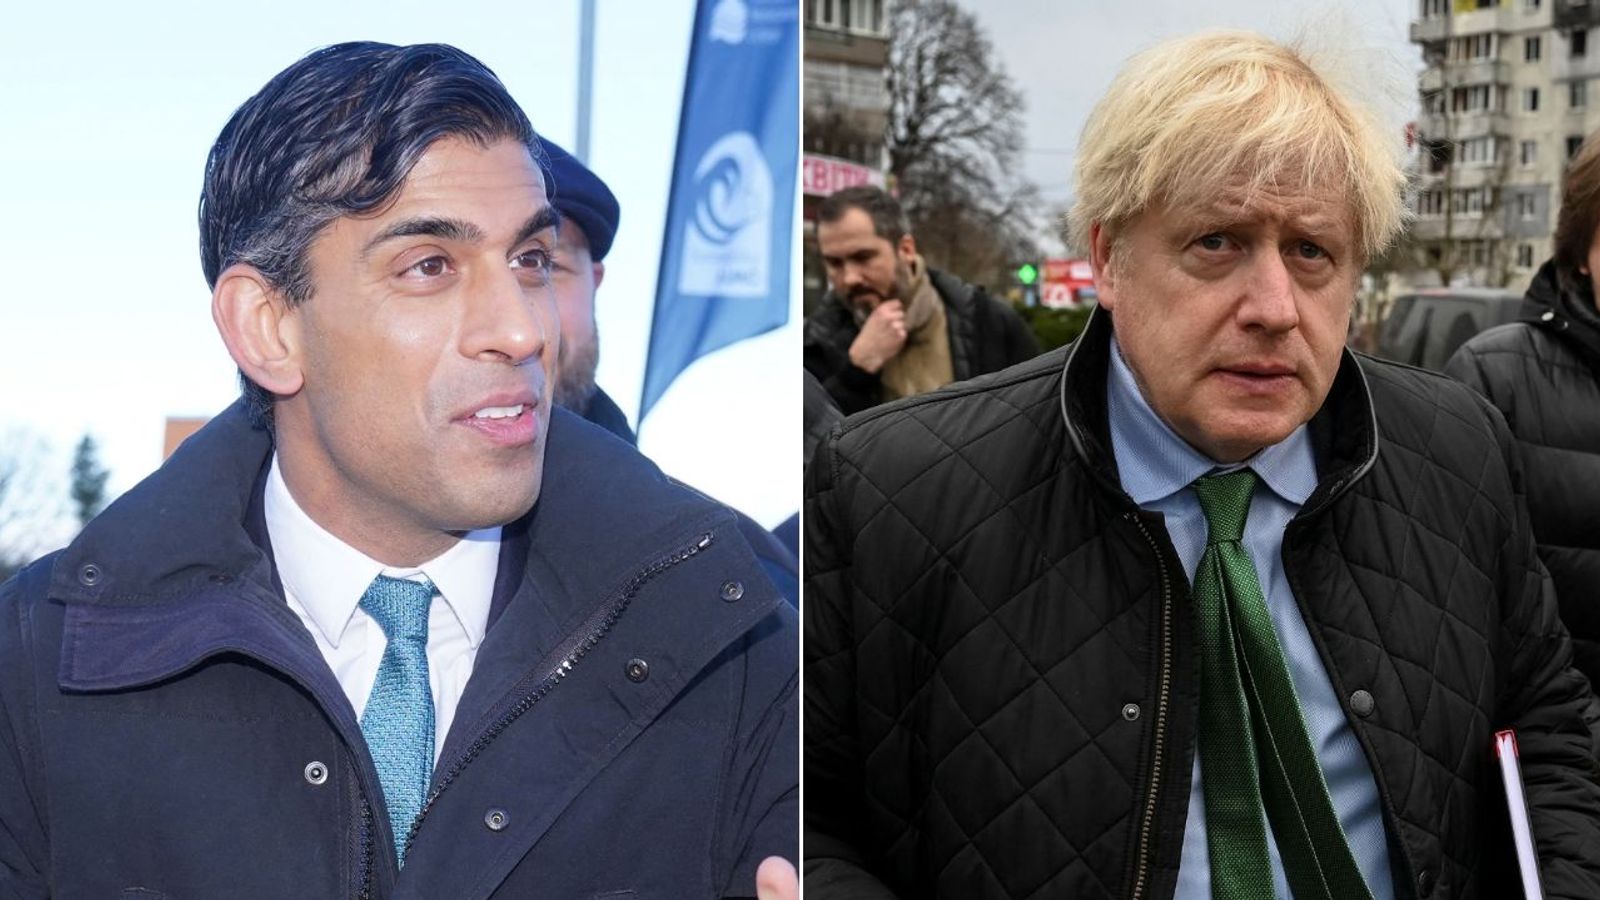 Latest Johnson scandal may damage former PM - but what will the fallout be for Rishi Sunak?